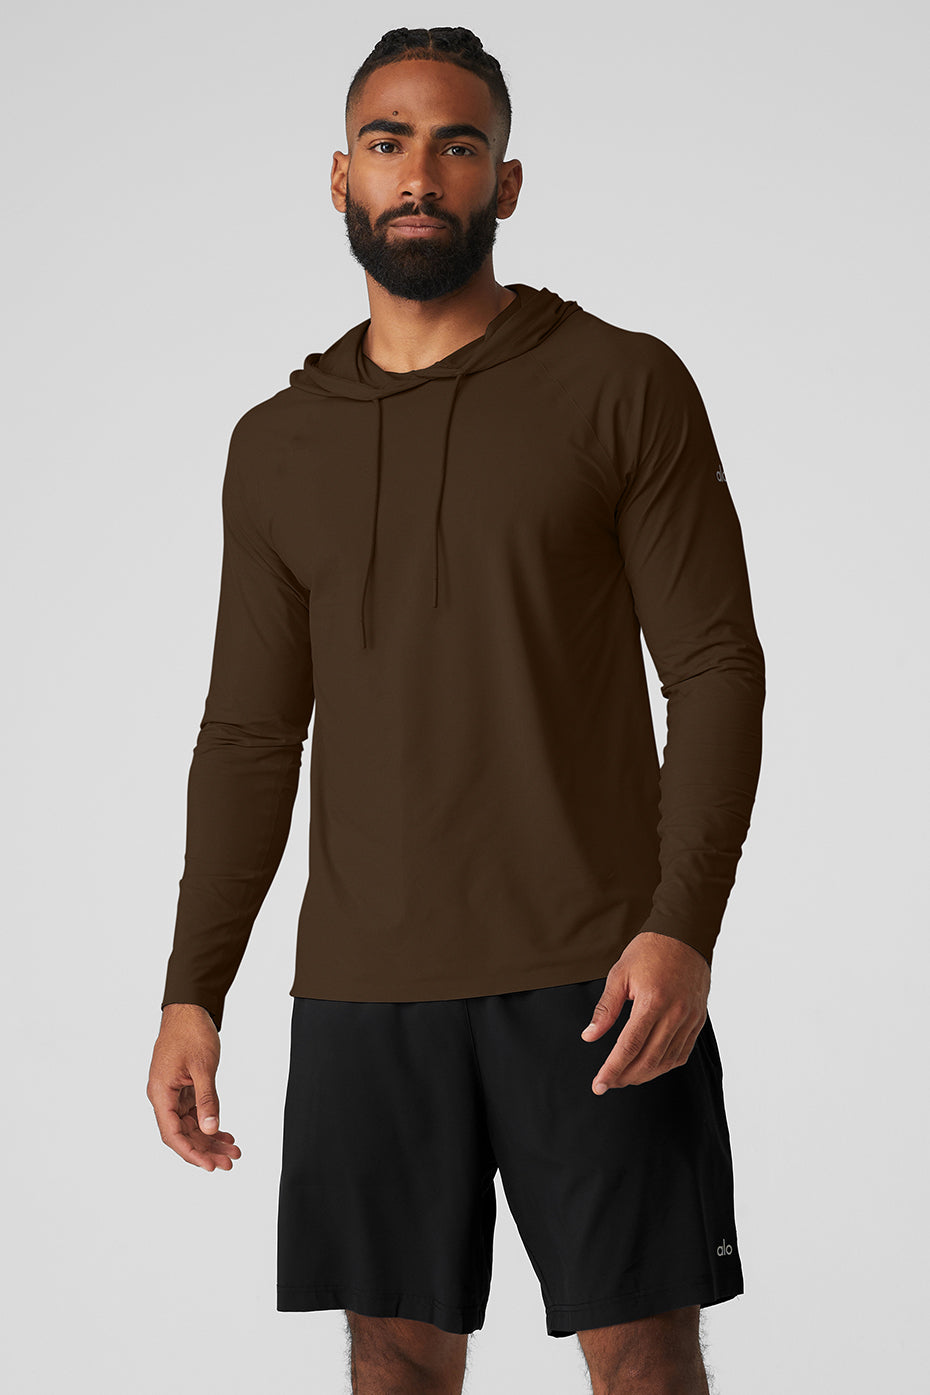 New In Alo Yoga Accolade Hoodie For Men Espresso from the fresh 2023  collection at